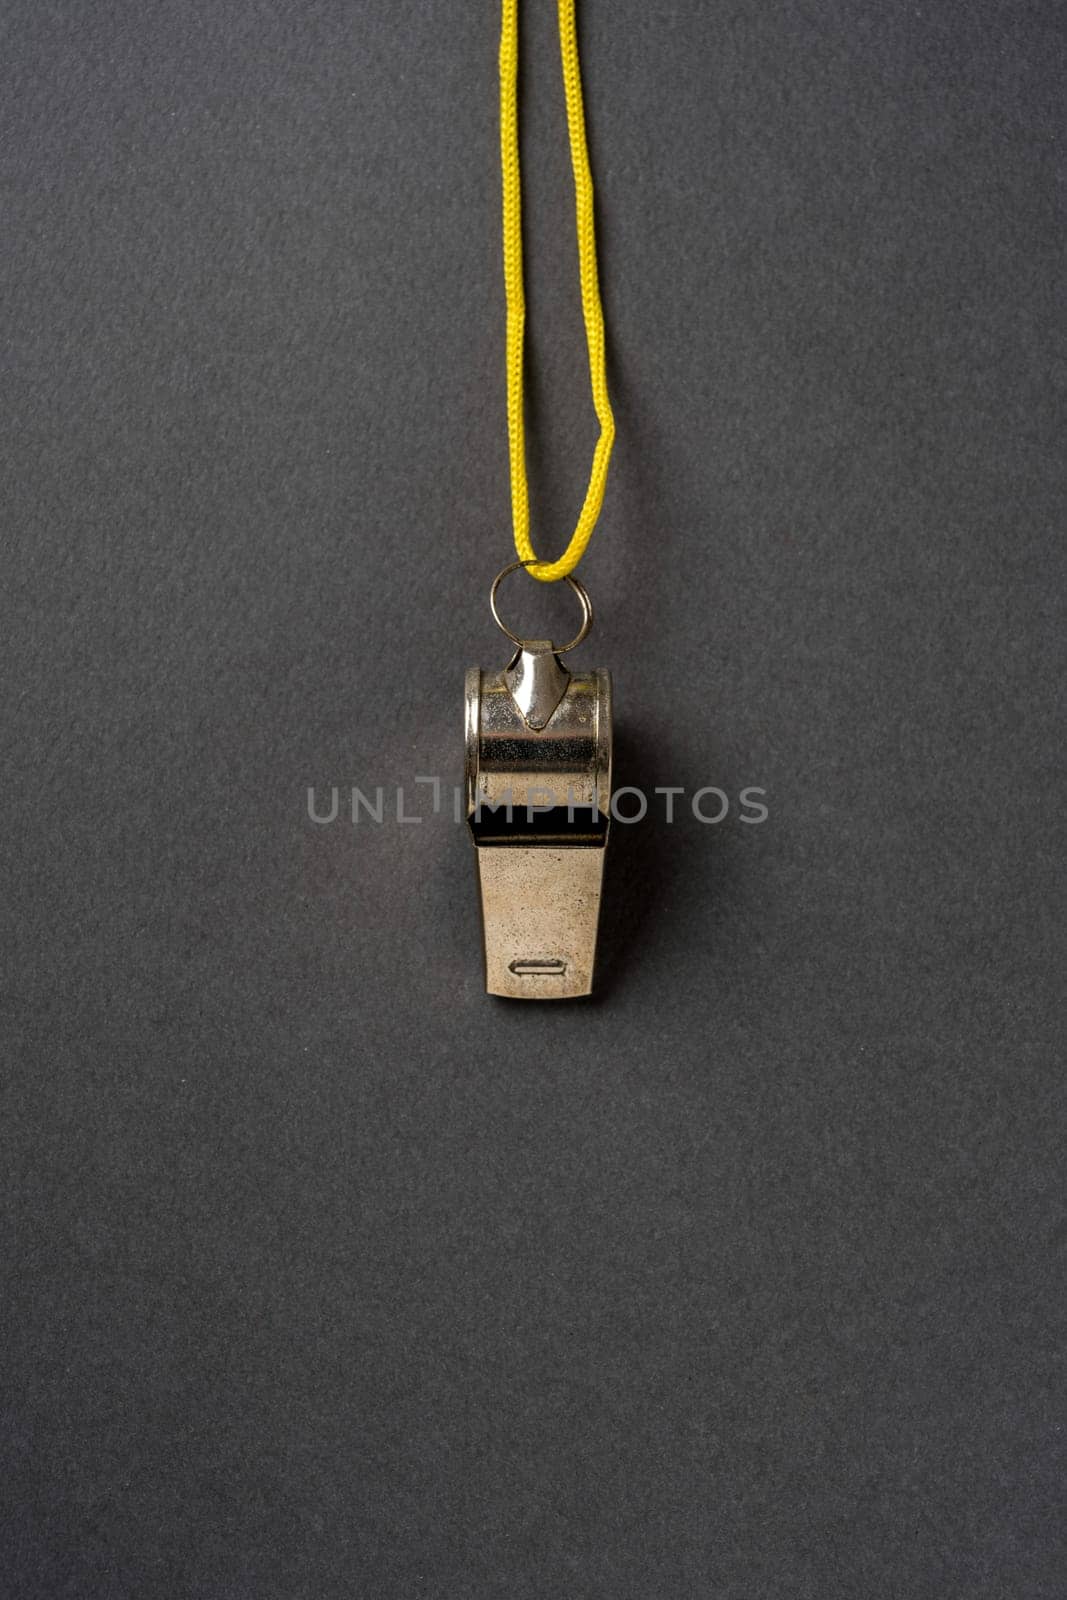 Top view of metal whistle with yellow string on dark gray background